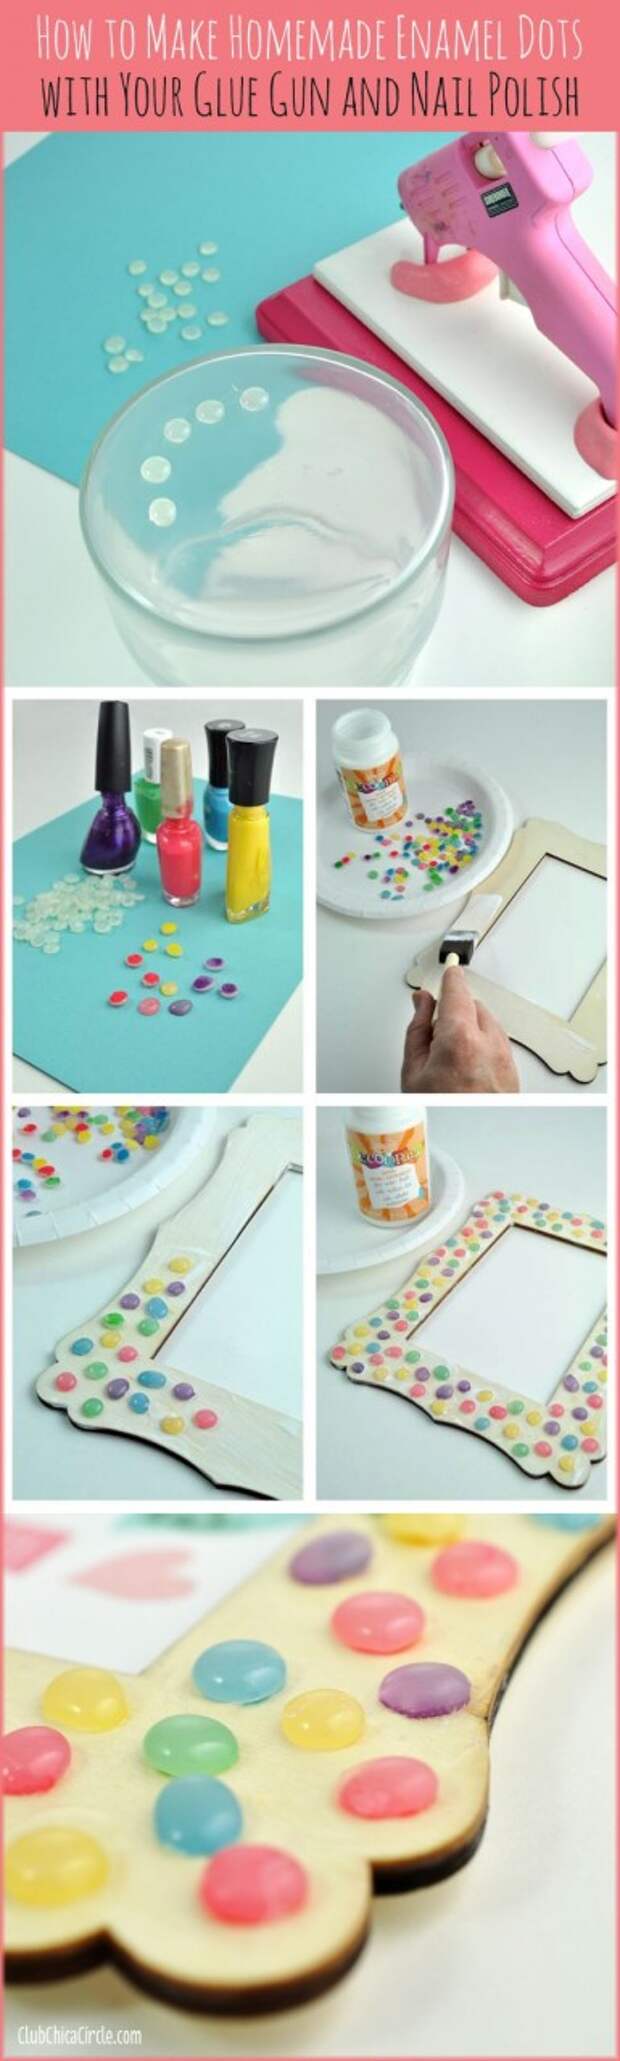 How to Make Homemade Enamel Dots with your Glue Gun and Nail Polish: 